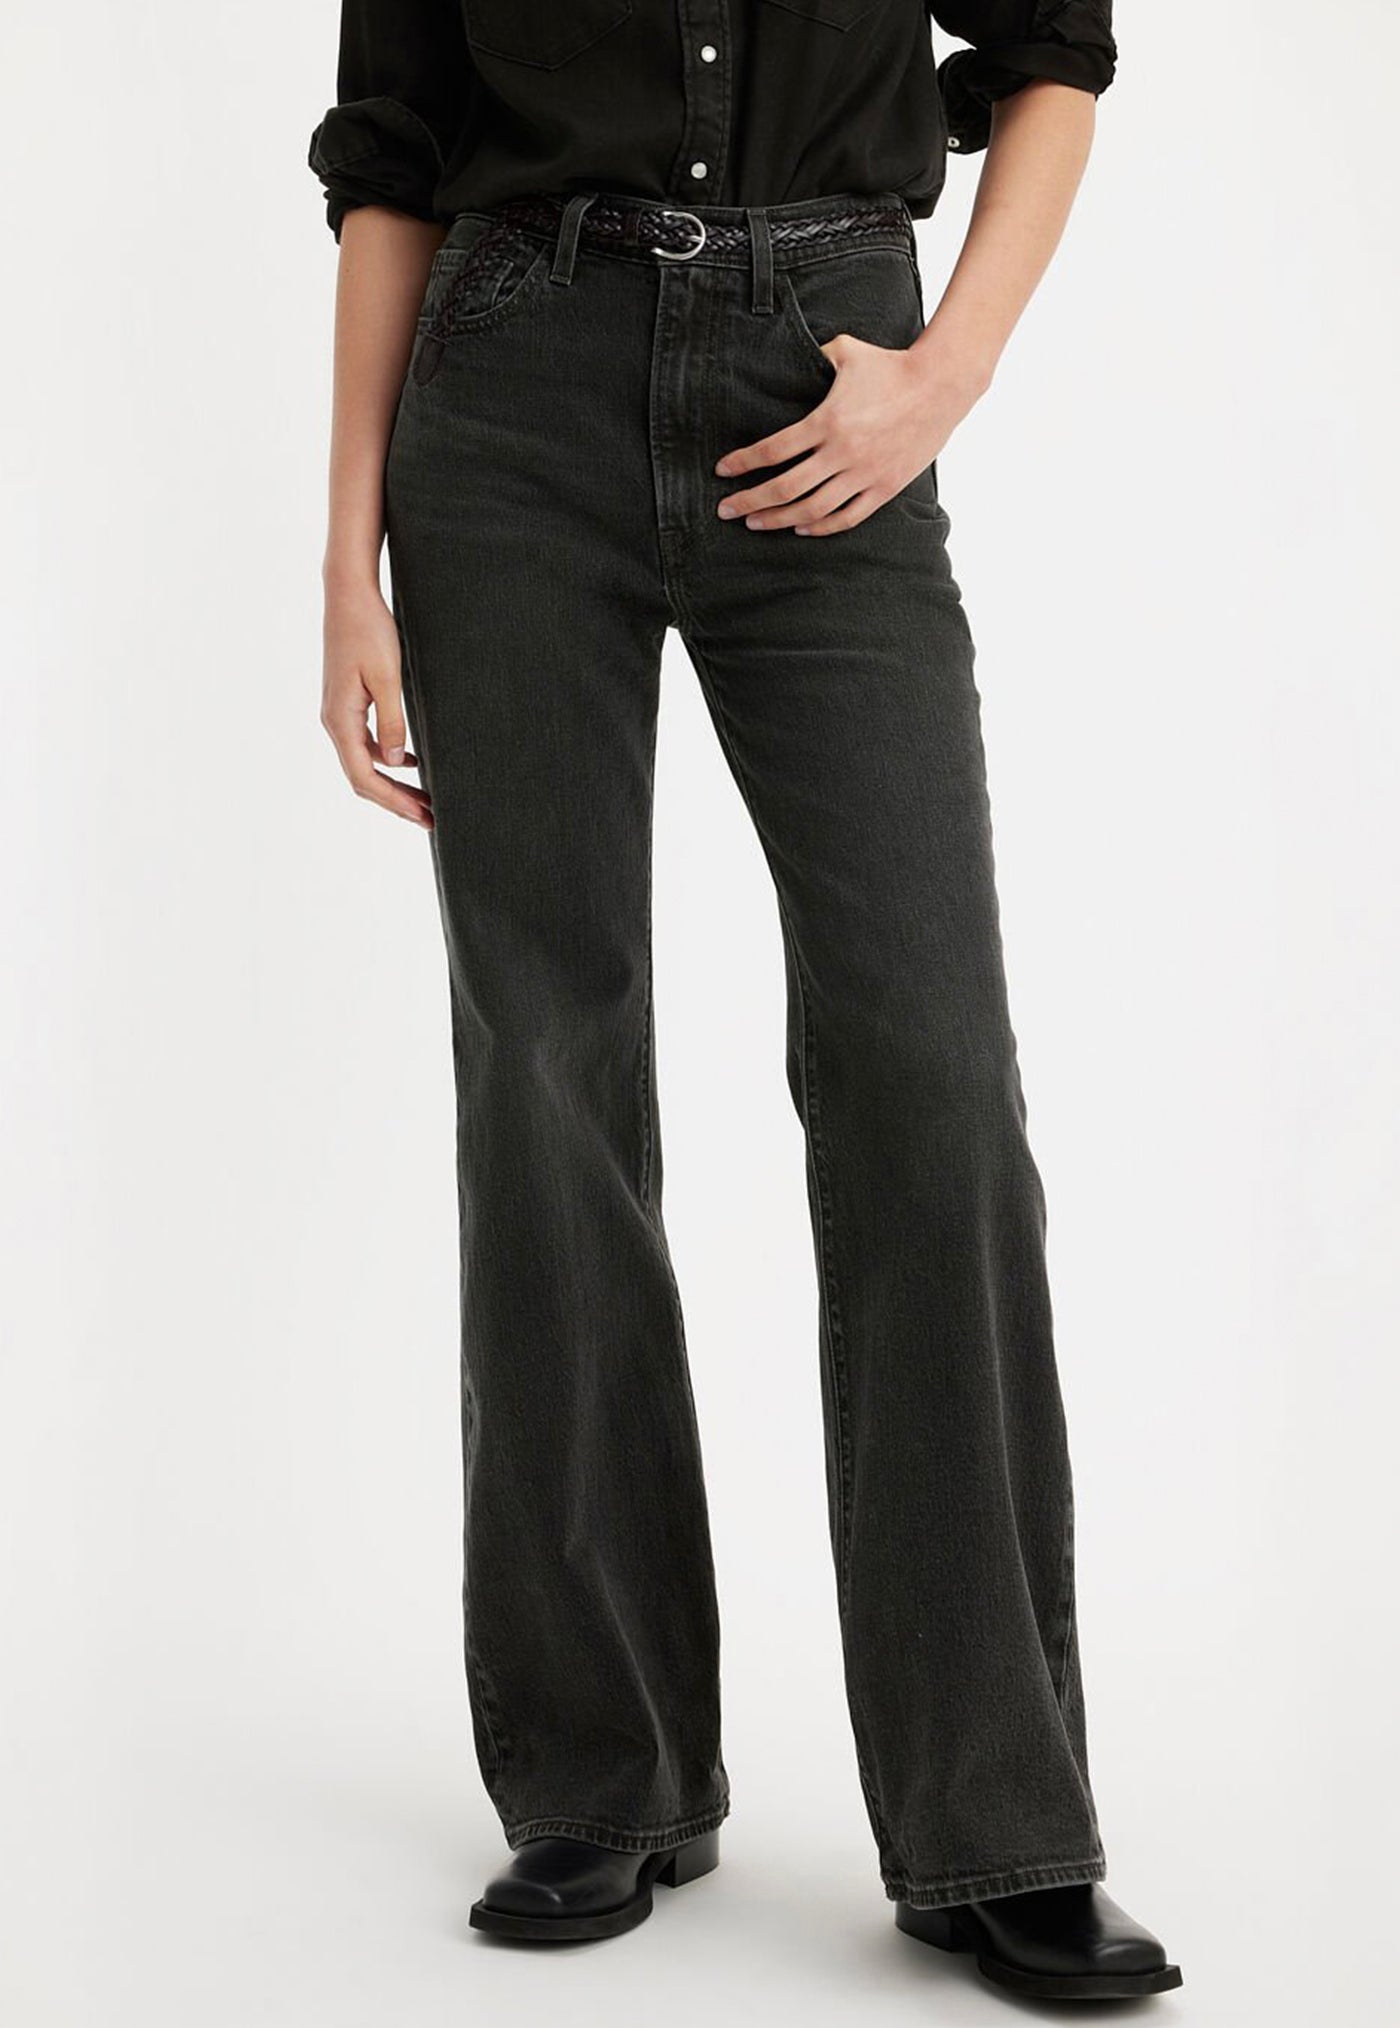 Ribcage Bell Jeans - On The Town No Crackle sold by Angel Divine